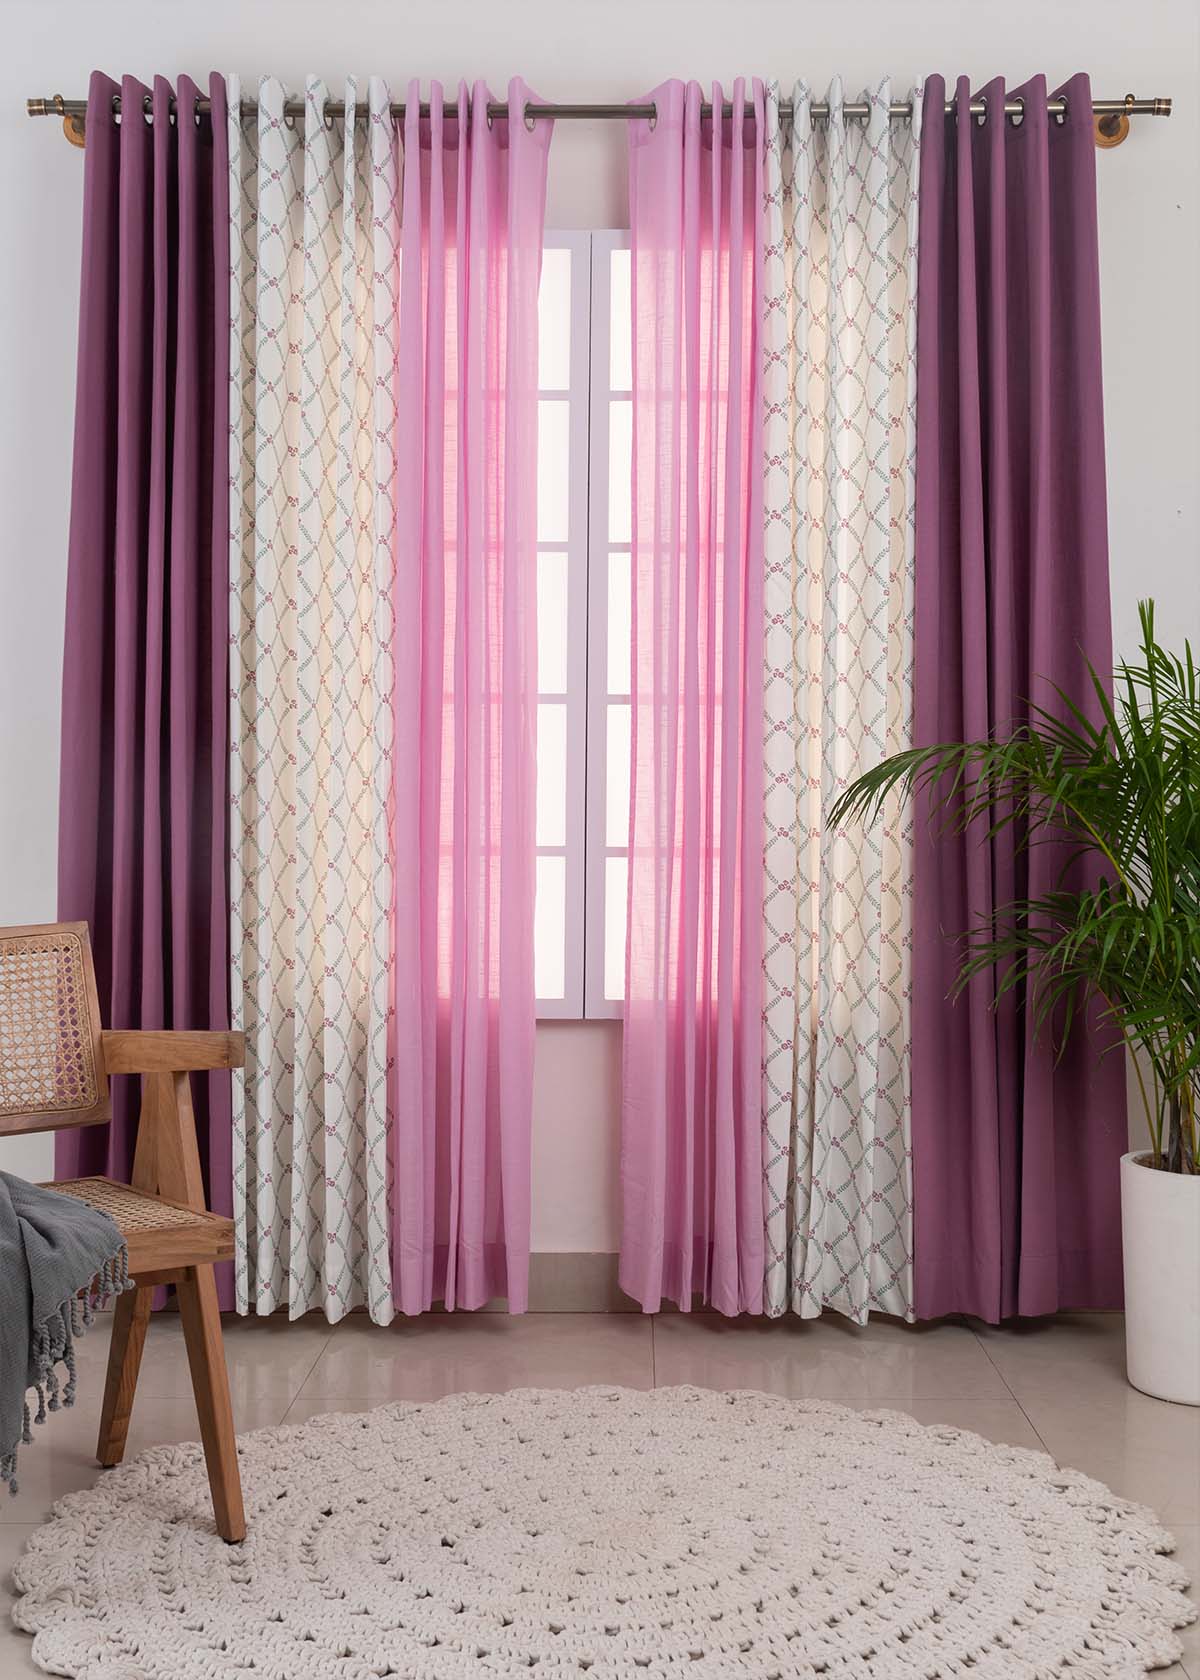 Grape Solid, Climbing Roses In Lavender, Dusty Lavender Sheer Set of 6 Combo Cotton Curtain - Grape Lavender